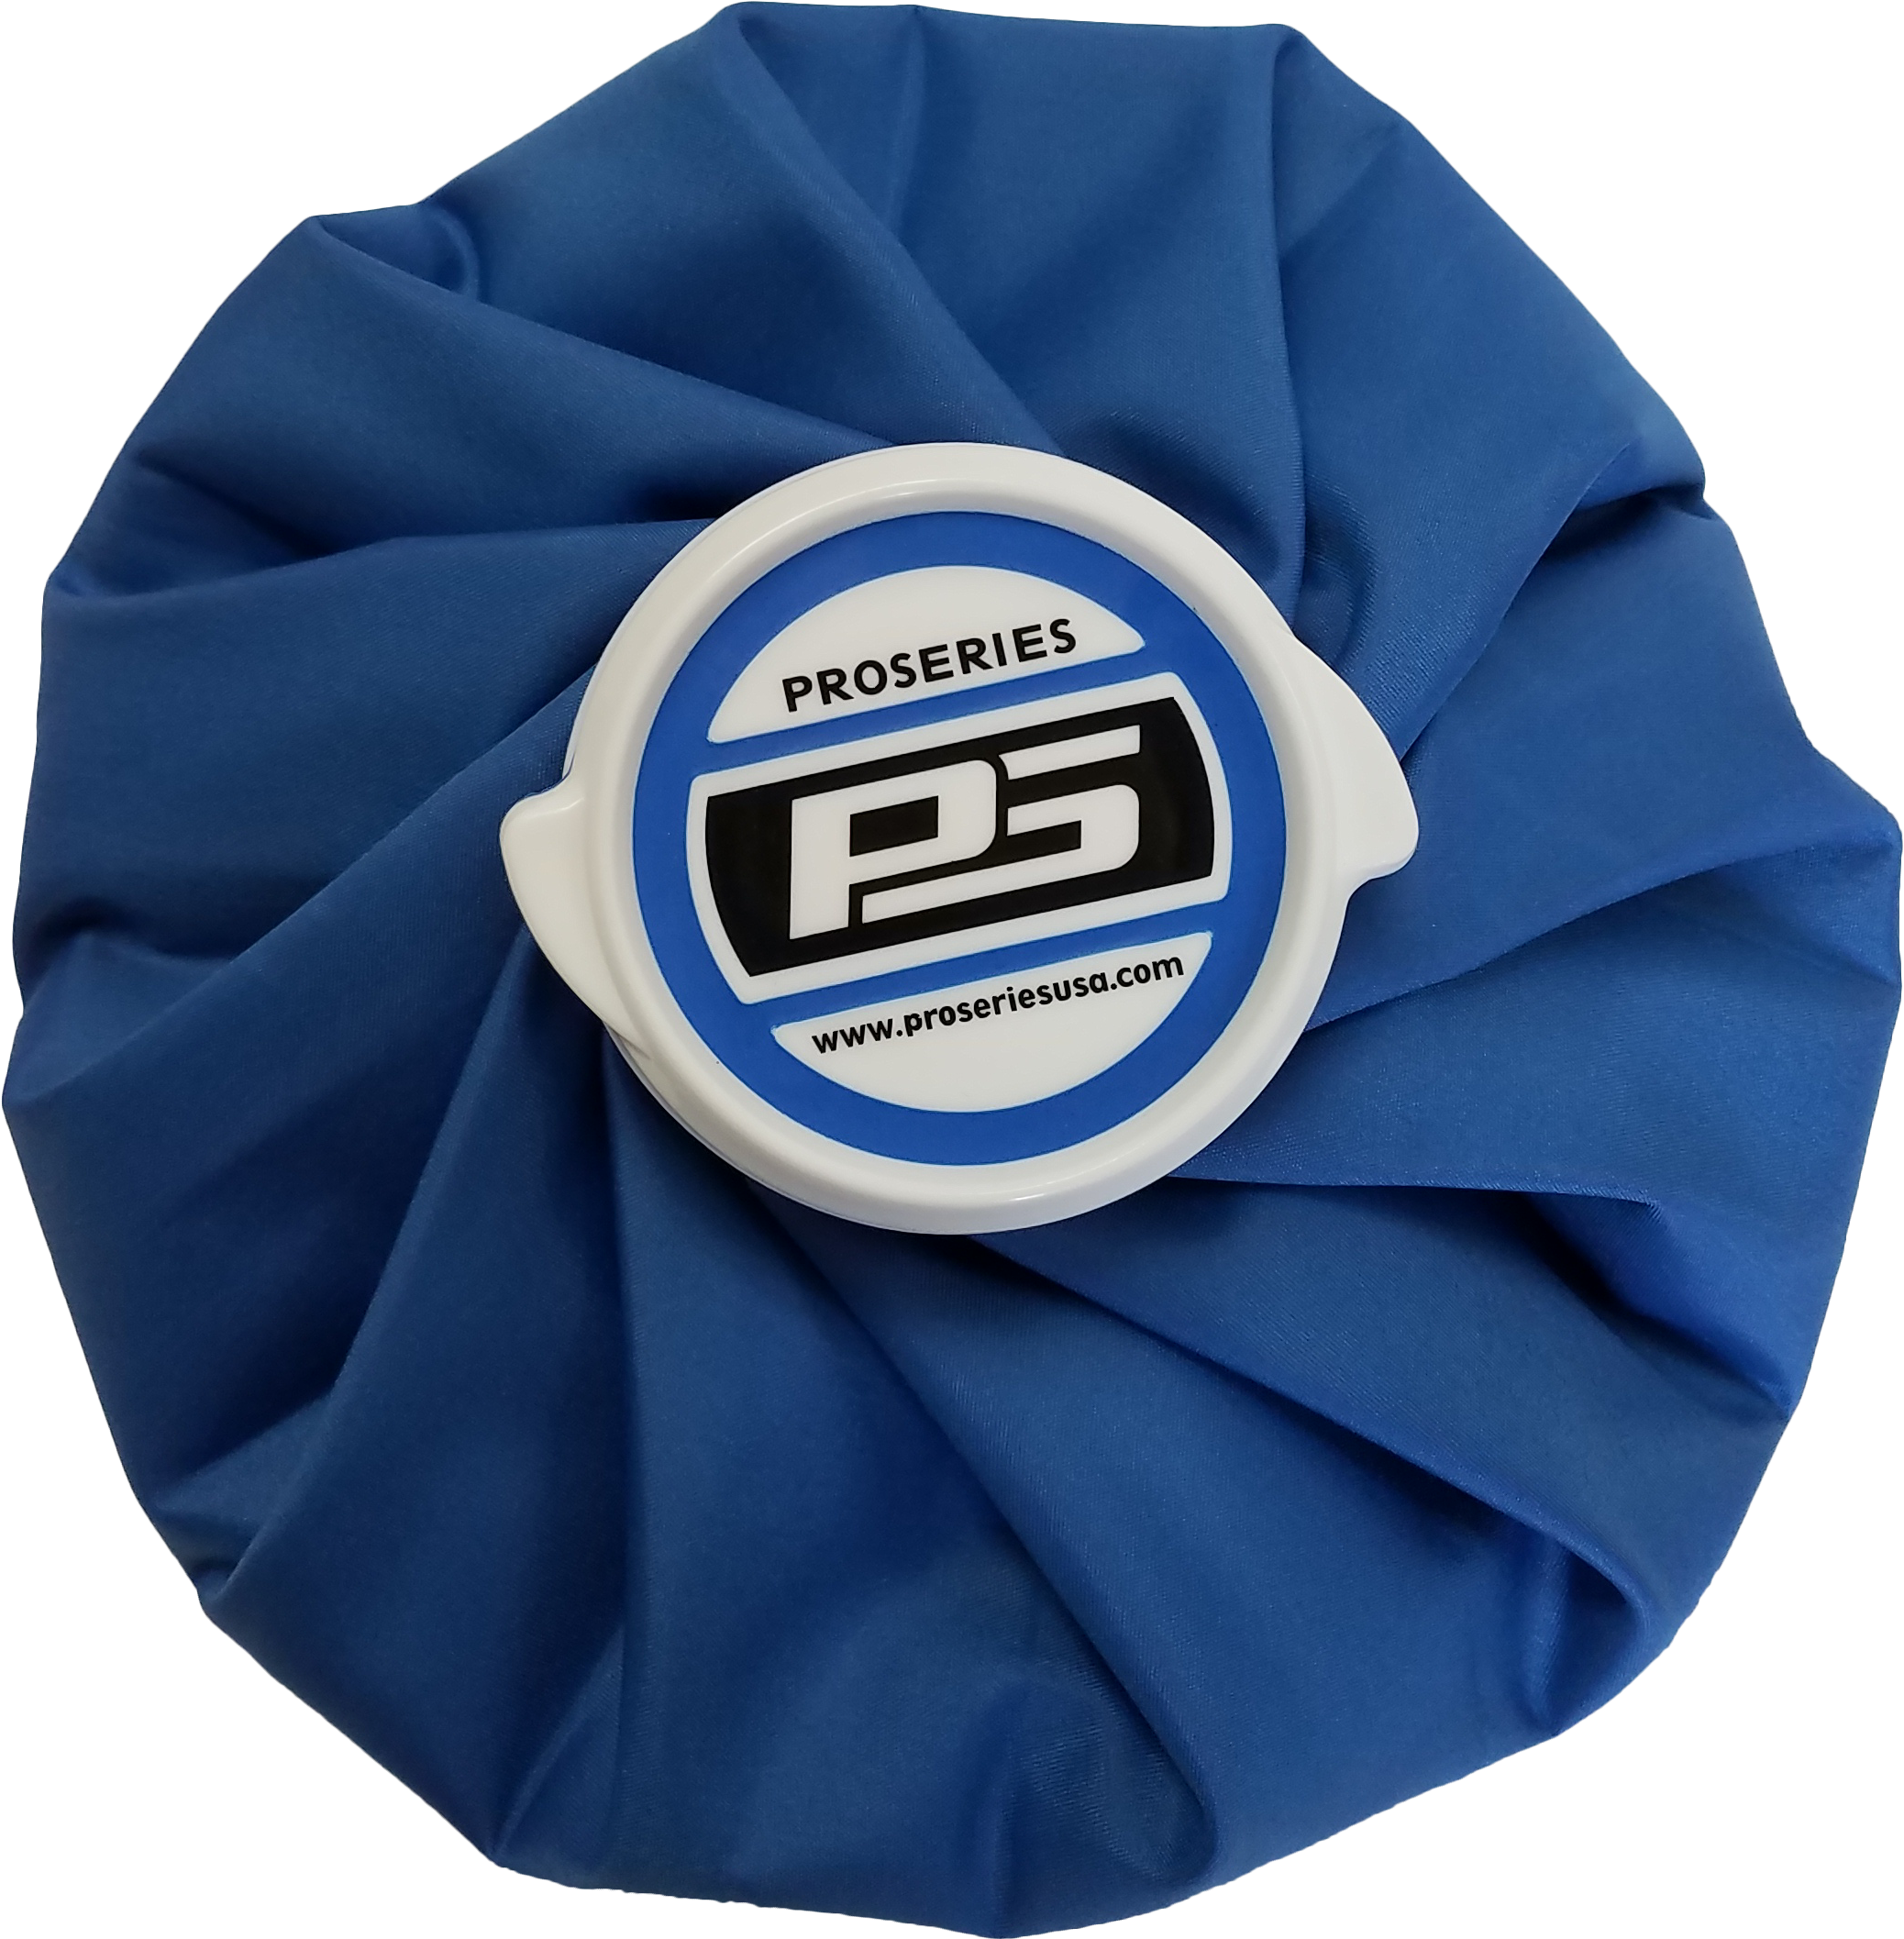 Proseries Ice Bag - Badge (2268x2560), Png Download